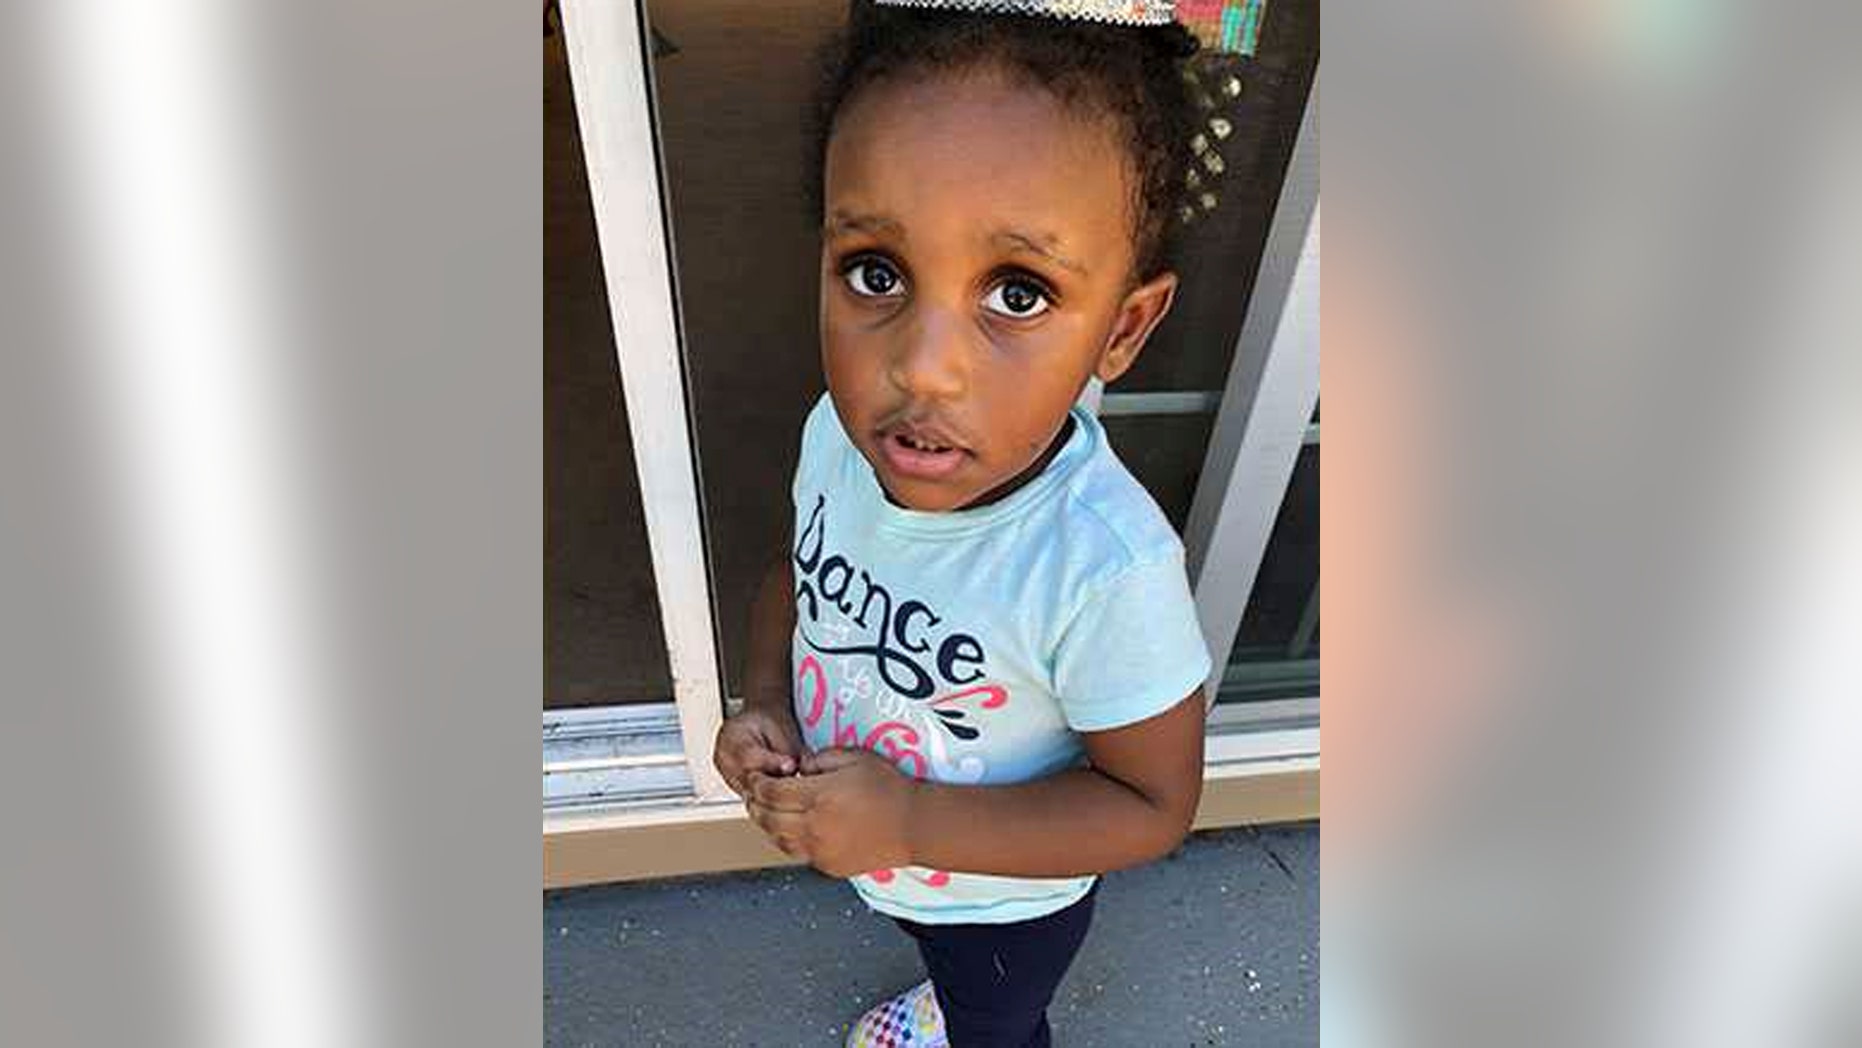 Body Of Missing 2 Year Old Girl Found Wrapped In Blanket Alongside 5708